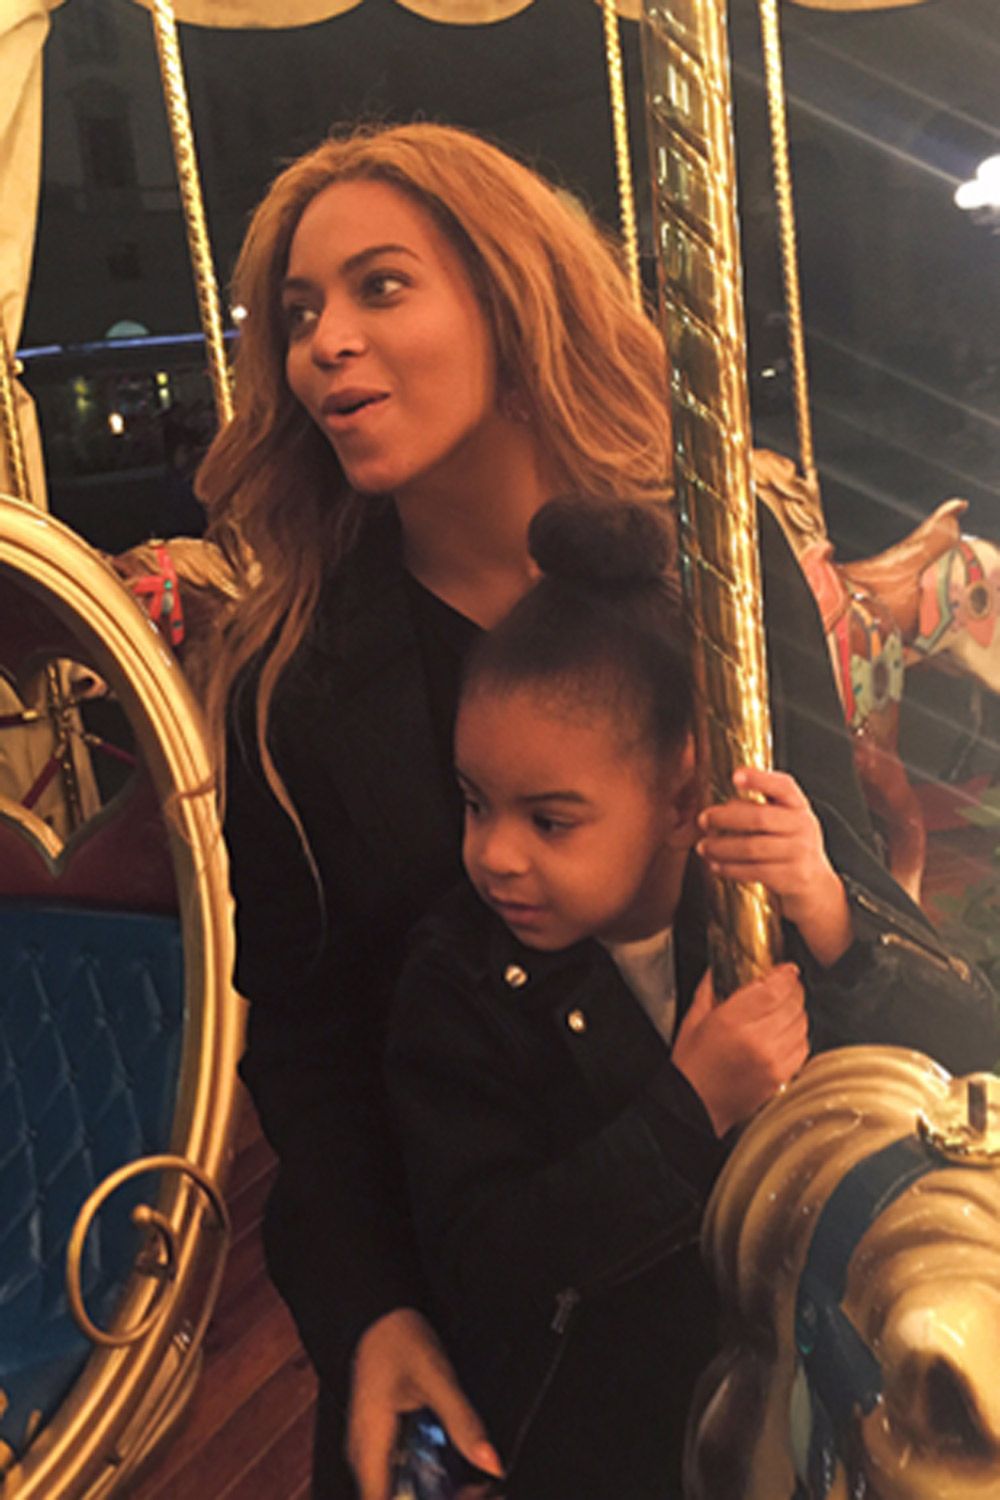 Beyoncé and Blue Ivy look like sisters in matching outfits